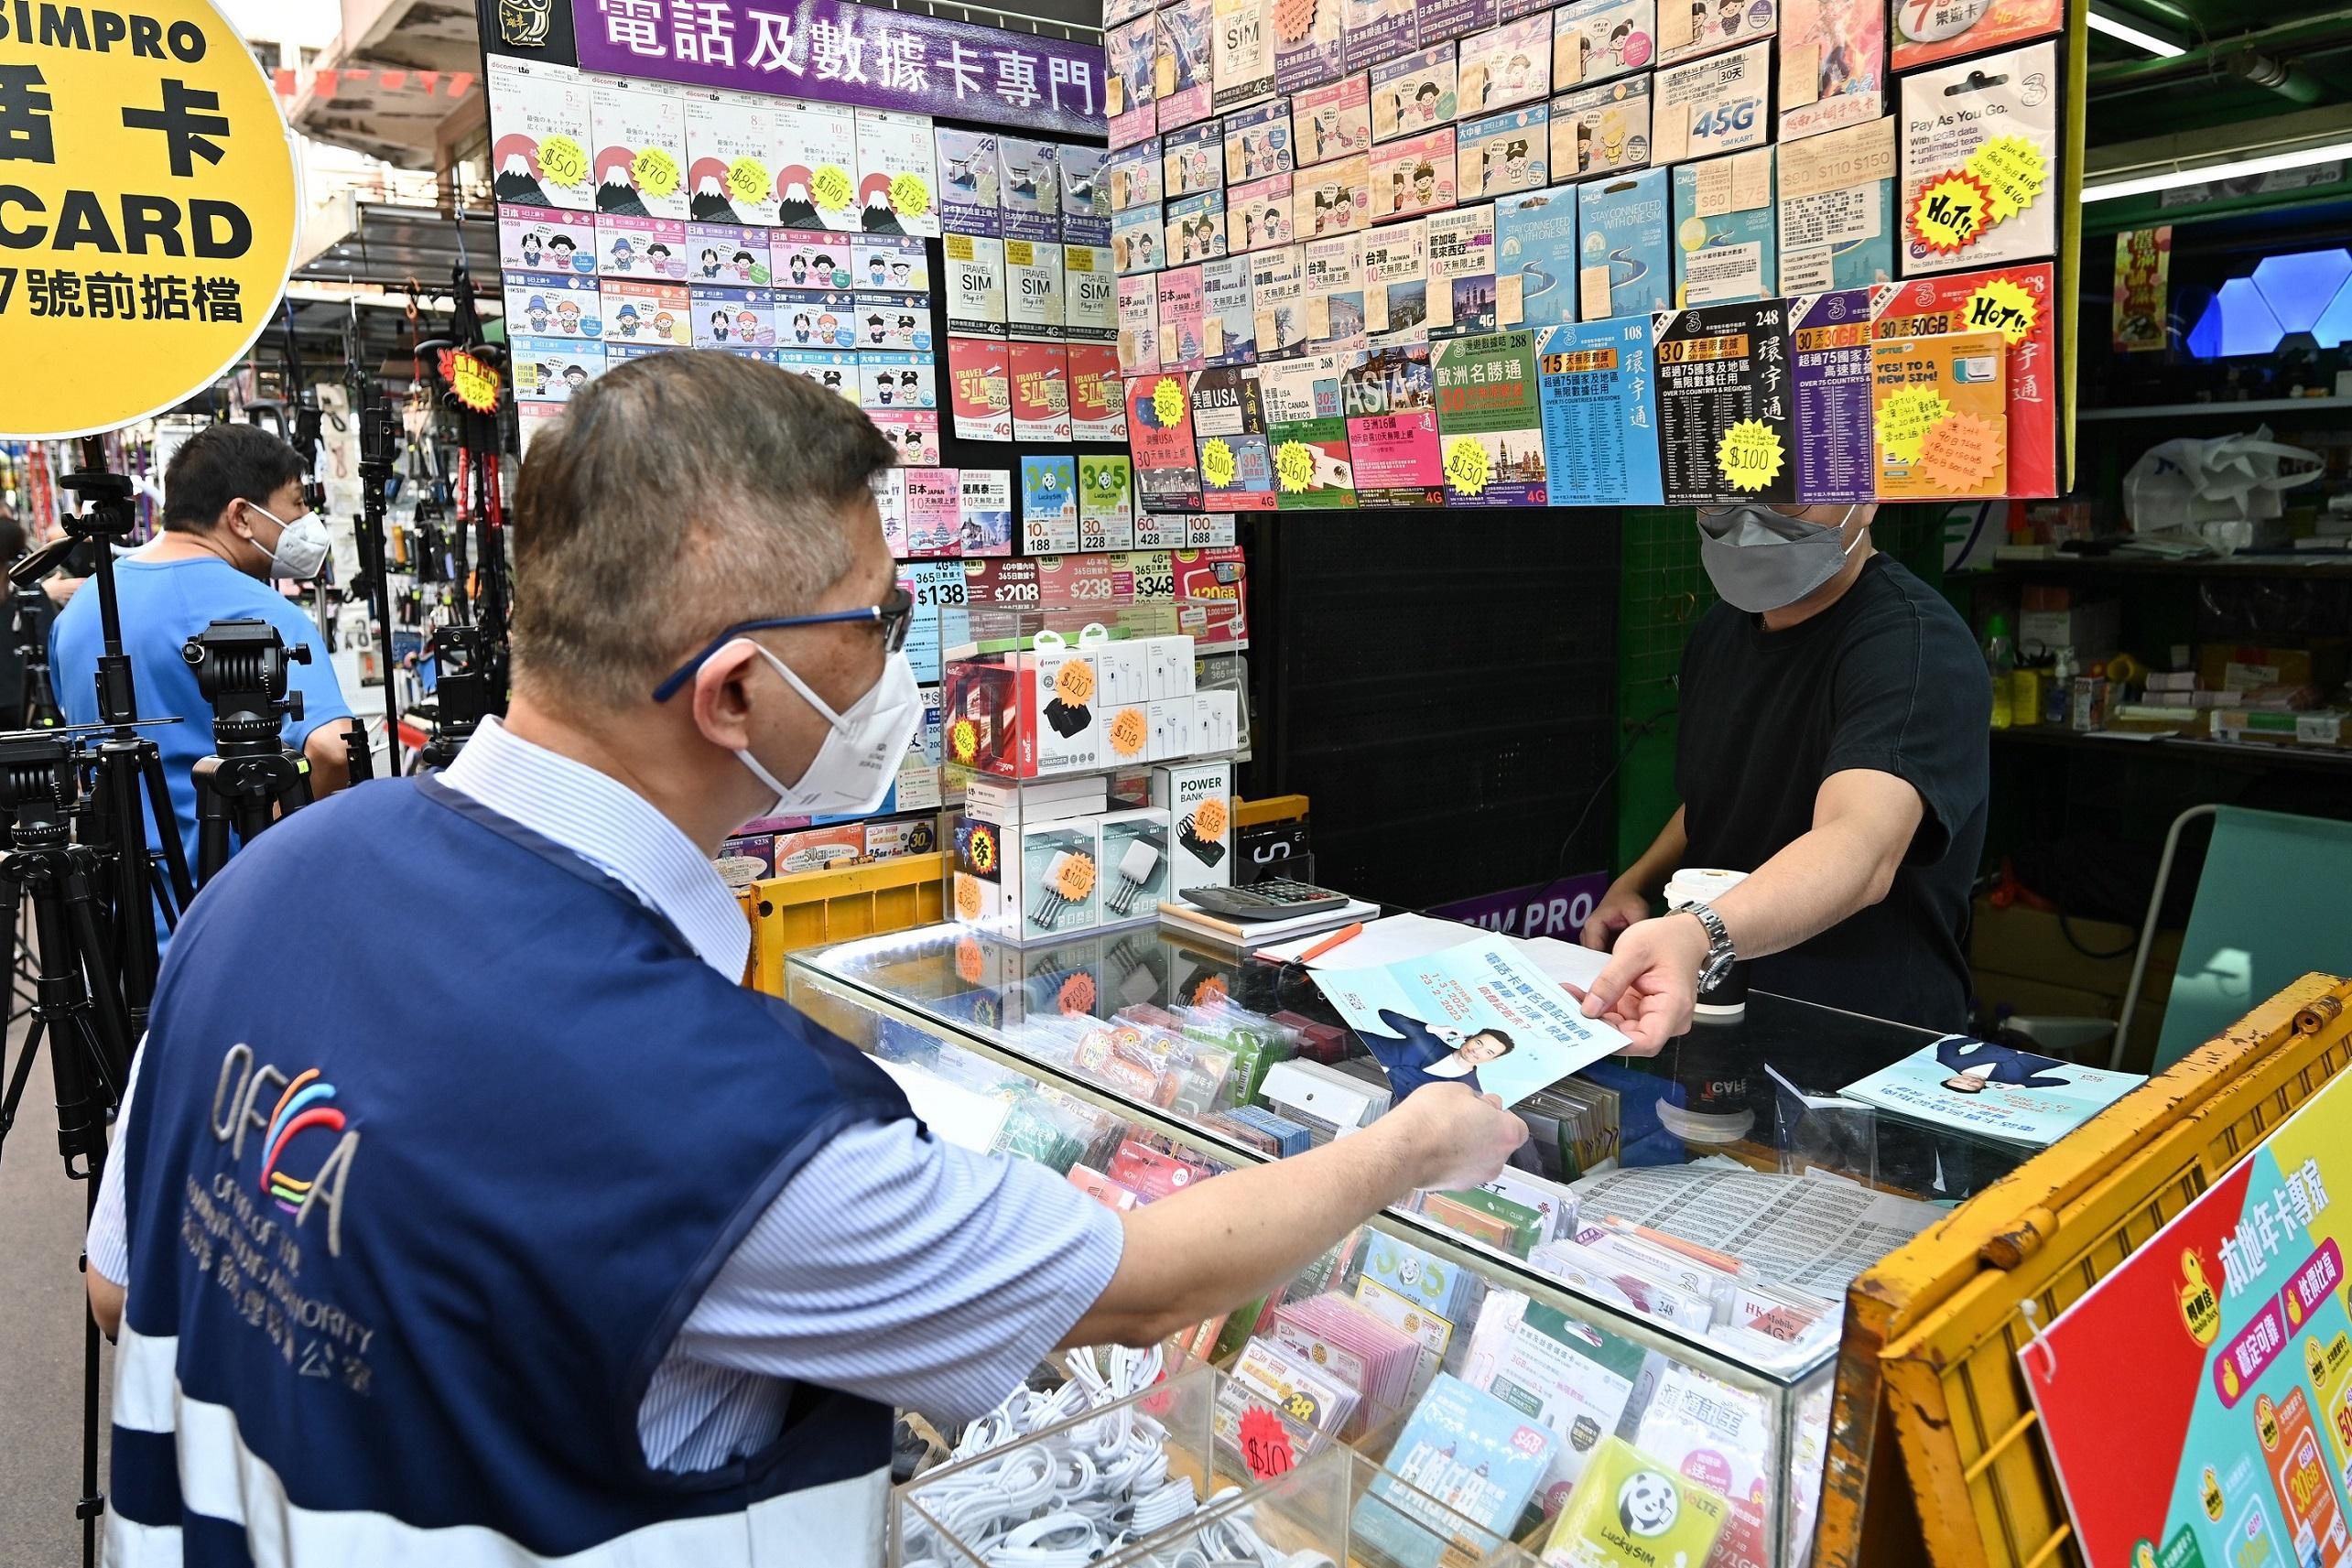 The Office of the Communications Authority (OFCA) conducted market surveillance this afternoon (April 11) in Sham Shui Po District to ensure effective implementation and enhance public awareness of the Real-name Registration Programme for Subscriber Identification Module (SIM) Cards. Photo shows OFCA’s staff visiting a store selling pre-paid SIM cards in Apliu Street.